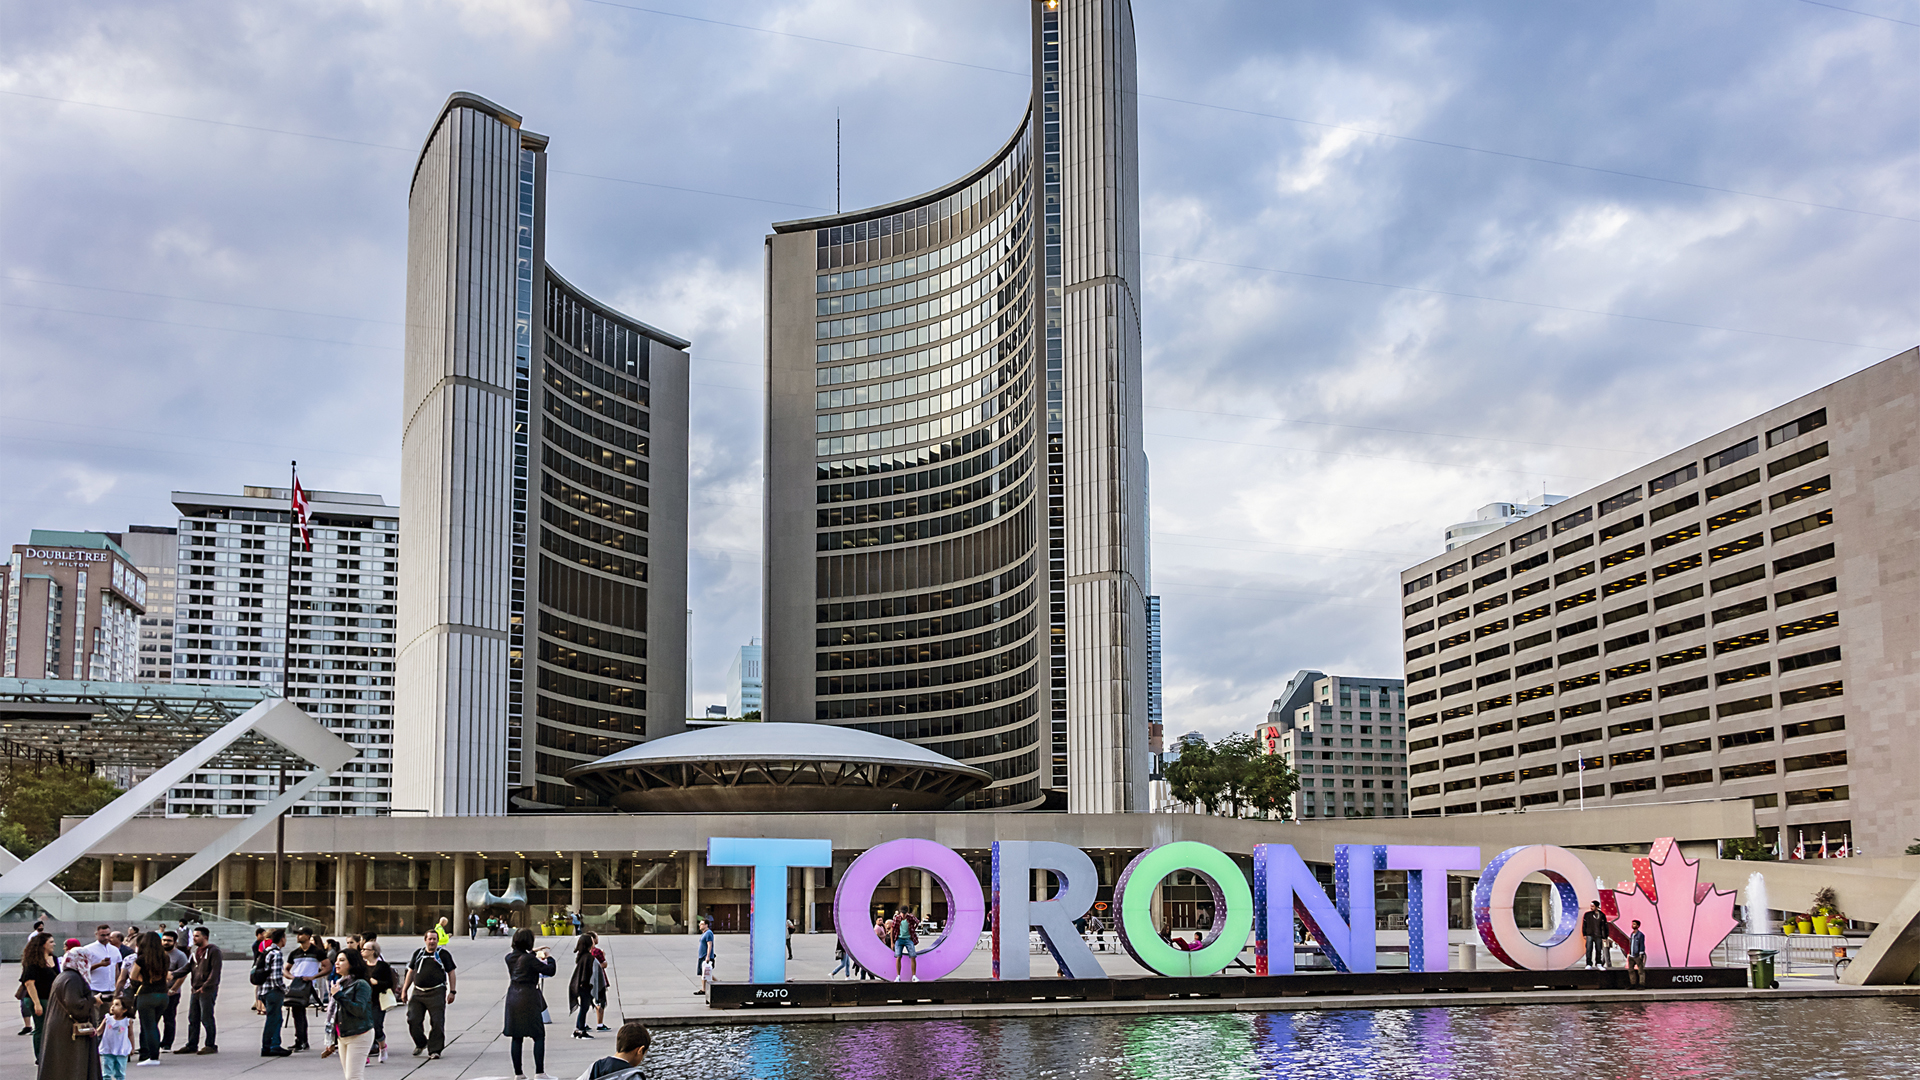 The numbers tell us who’s in charge at Toronto city hall